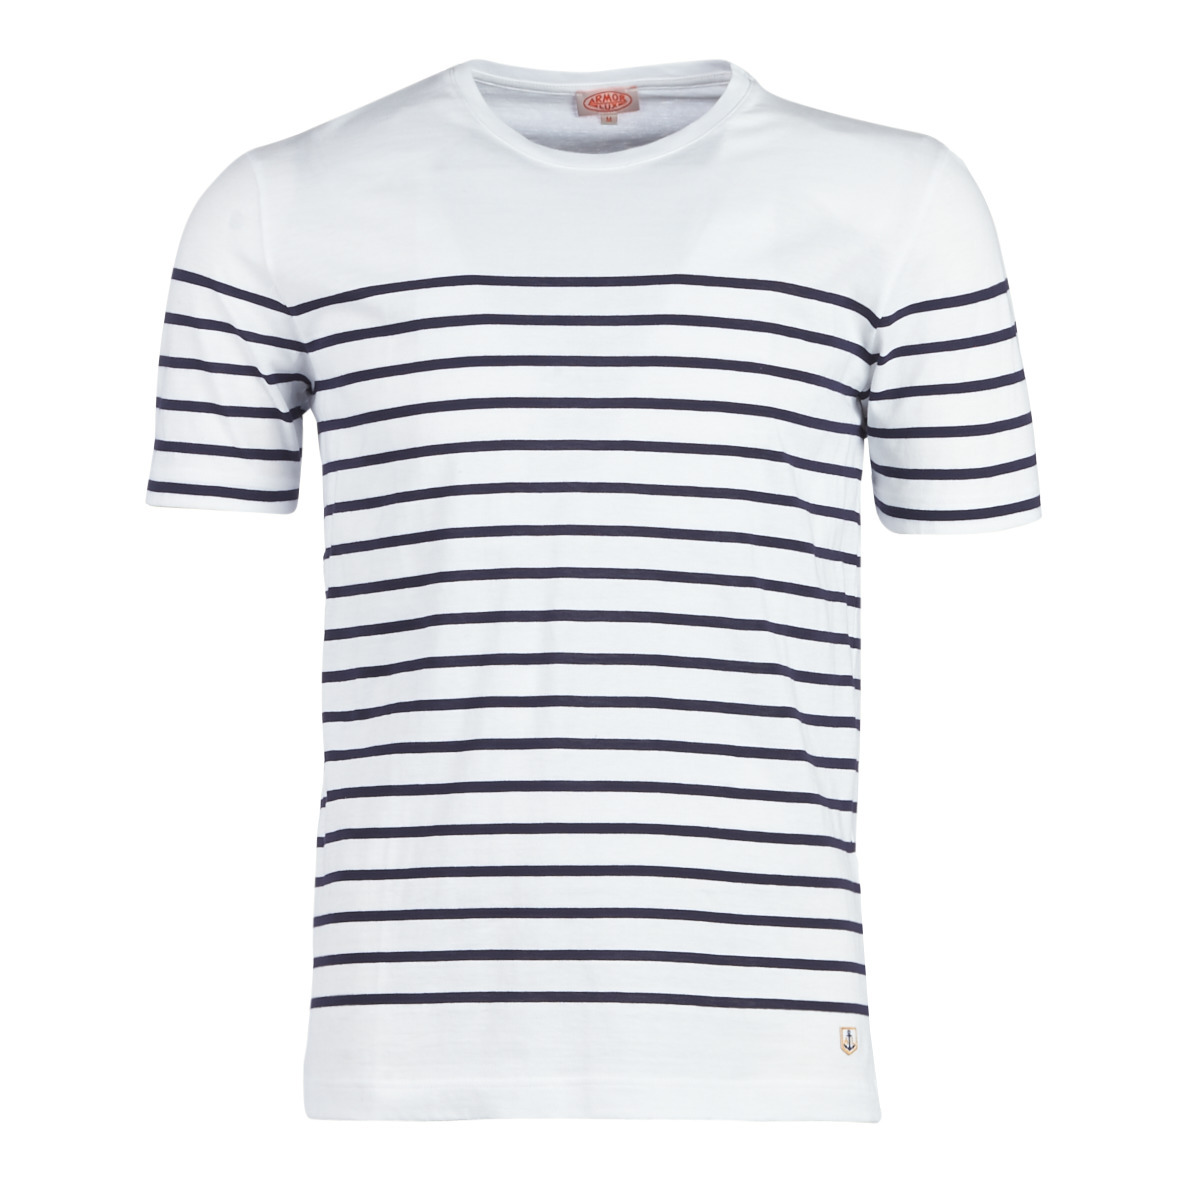 Gent T-Shirt in White - Armor Lux - Spartoo GOOFASH